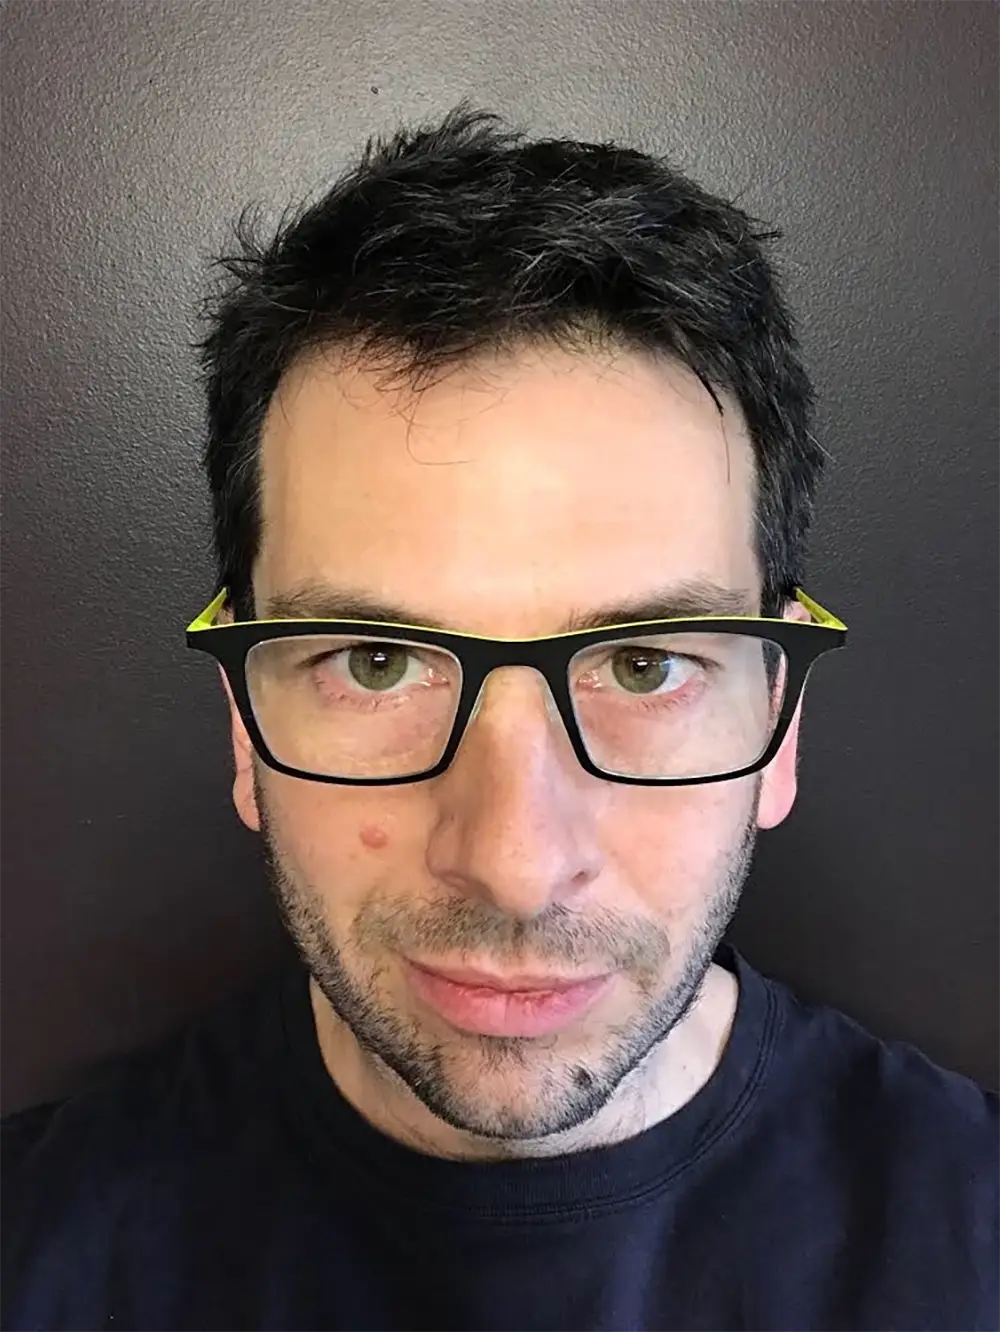 Two photos of a masculine face. The first shows him without glasses and a beard, with the photo taken from below, emphasizing his jaw size. In the second, he is wearing glasses, sporting short stubble, and the photo is taken from above, causing his jaw to appear smaller.